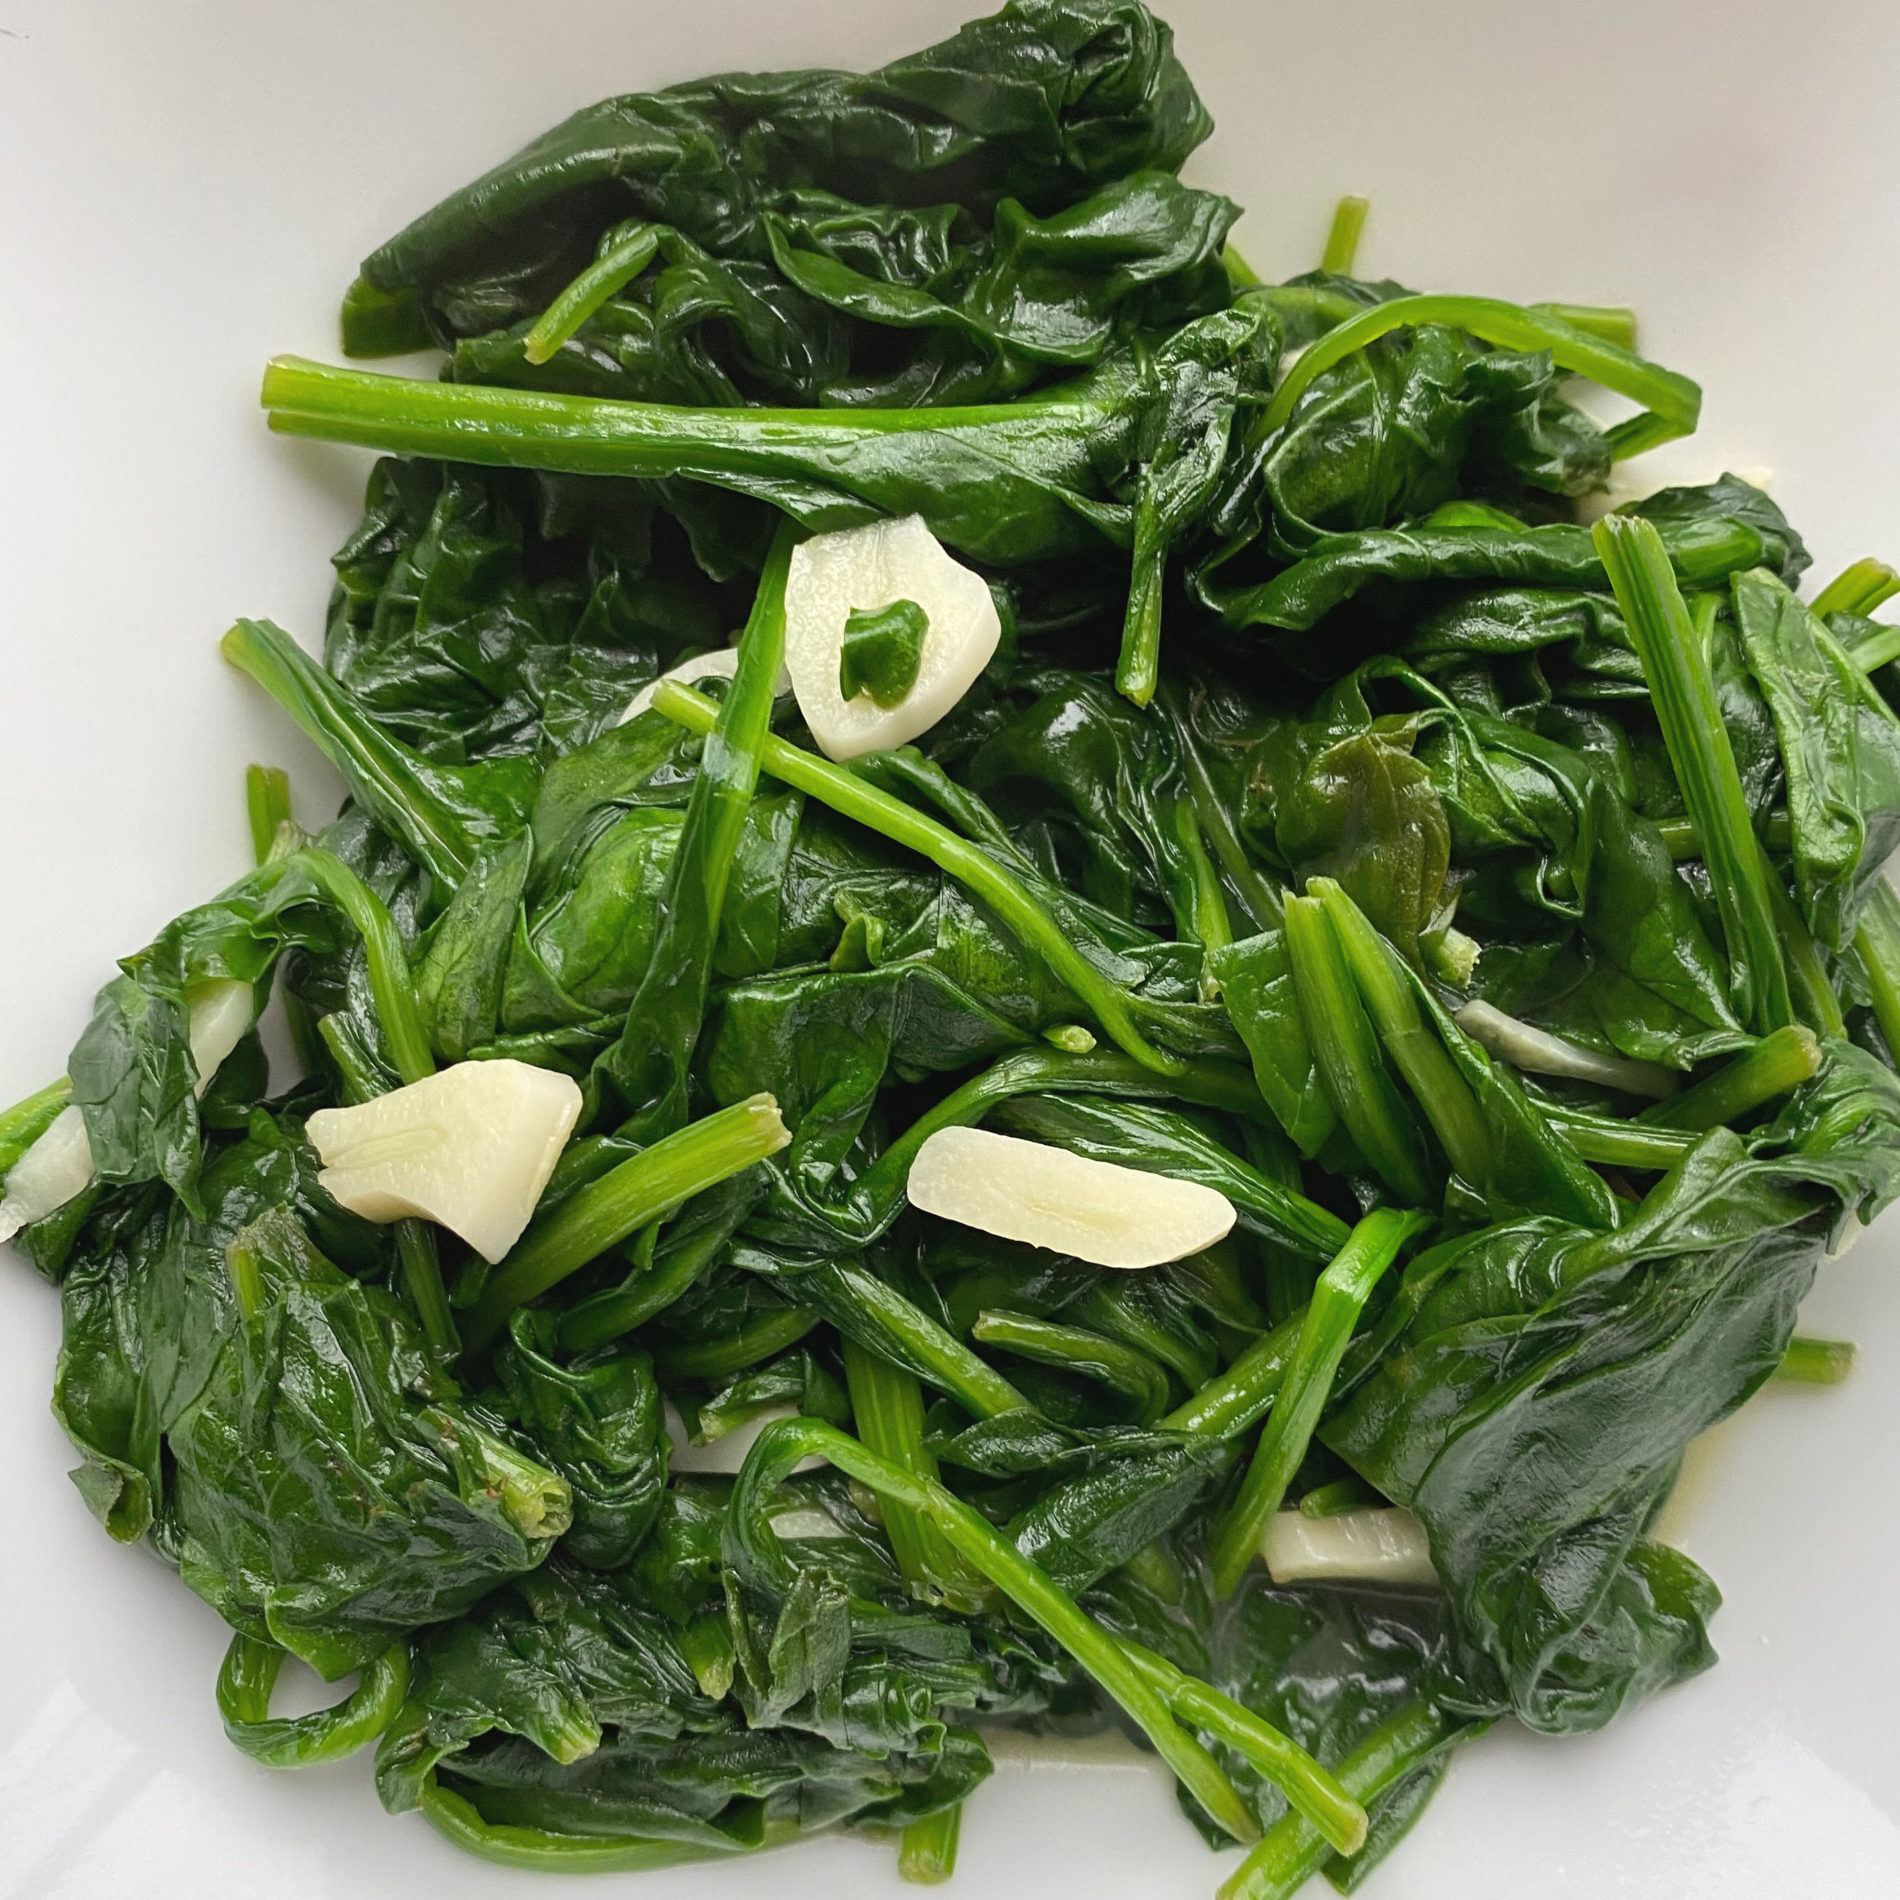 Sauteed Spinach & Garlic - The Busy Vegetarian